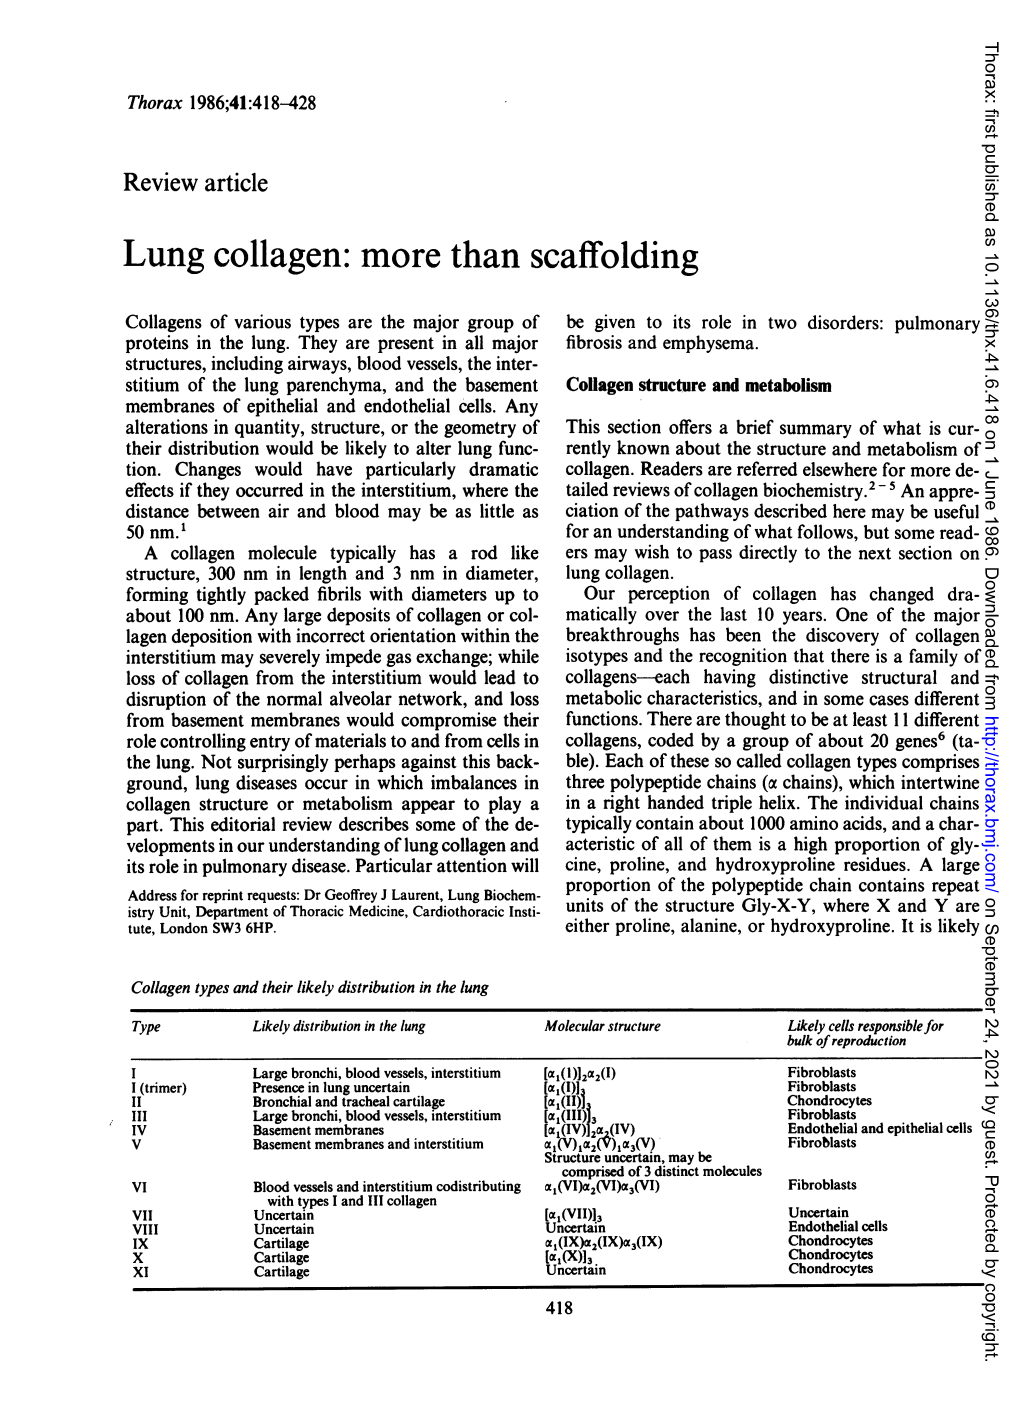 Lung Collagen: More Than Scaffolding